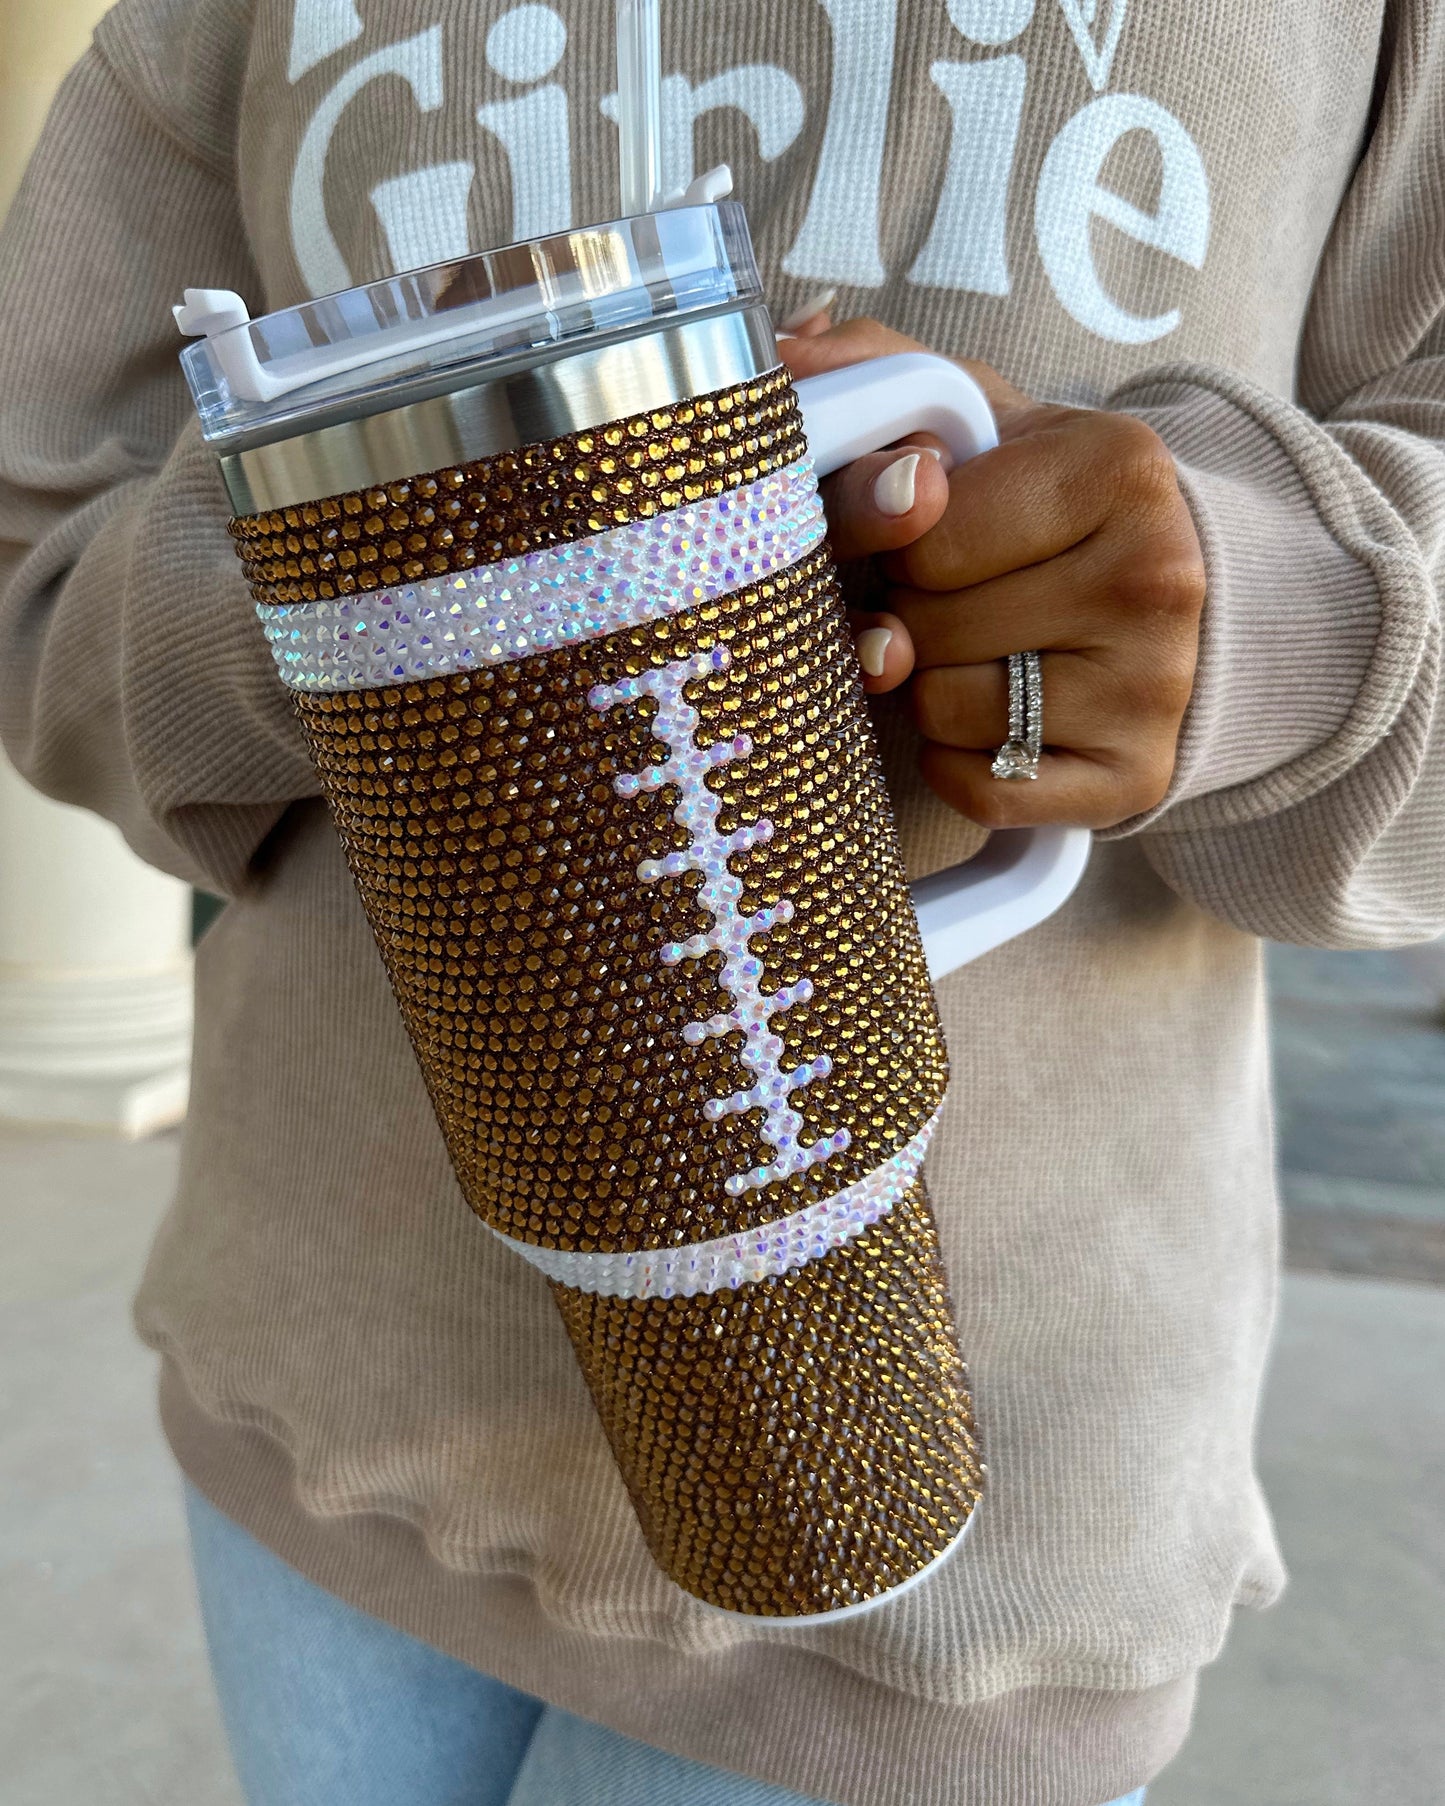 Crystal Football "Blinged Out" 40 Oz. Tumbler